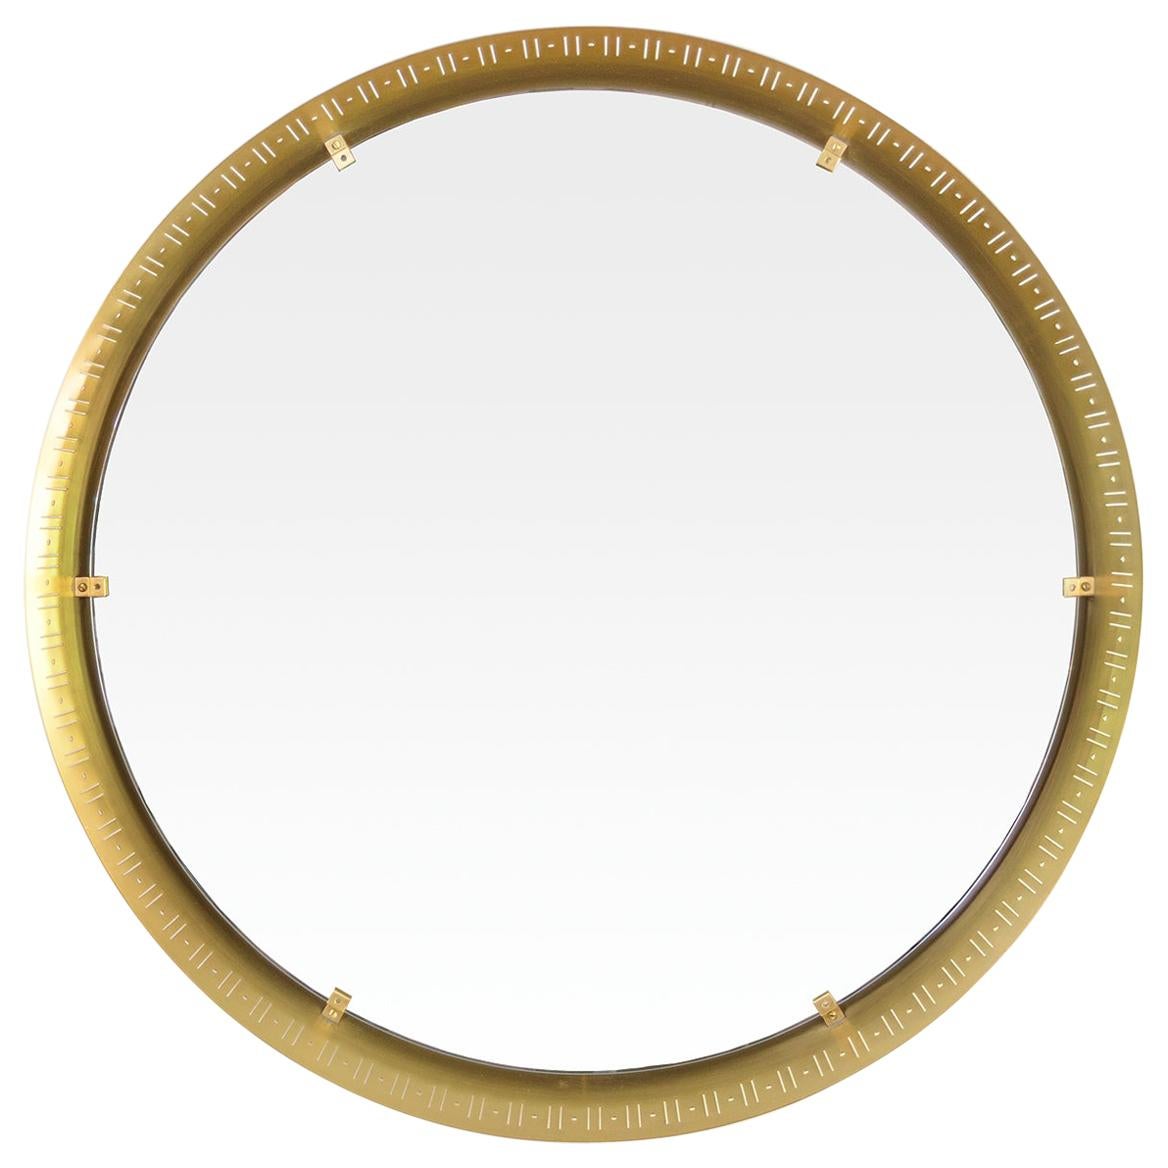 A Scandinavian Modern, round polished brass mirror. The frame has a “line and dot” design pierced around the frame. The mirror glass appears to float above a reveal. Newly polished and lacquered.
Measures: Diameter 25”, depth 2.5”.